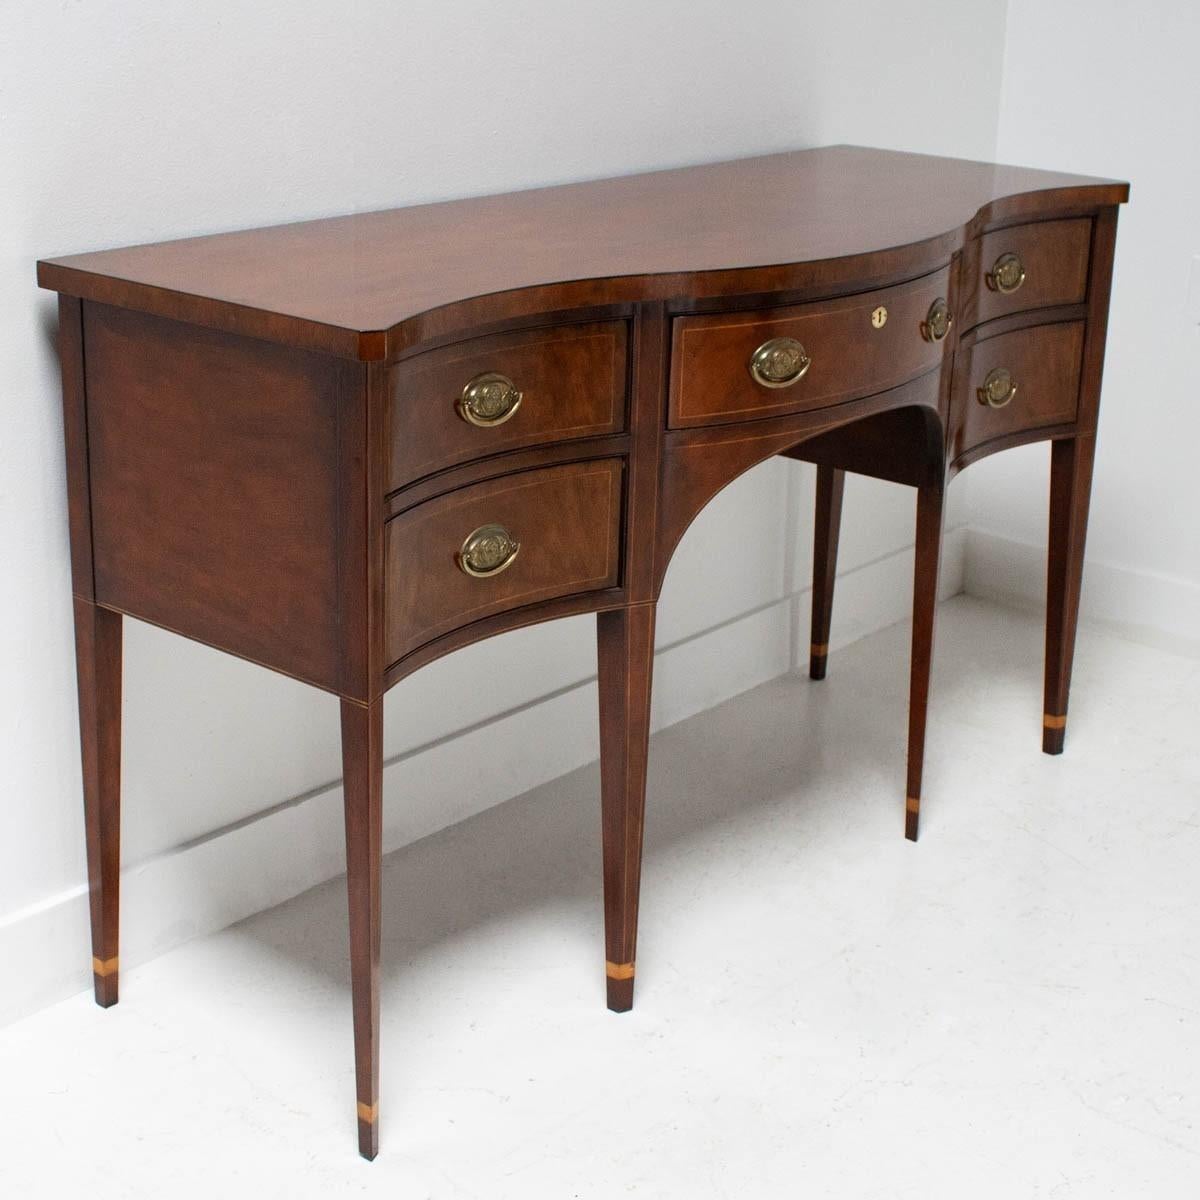 Classic mahogany sideboard made by the venerable Baker Furniture Company. It is part of their Historic Charleston Collection. Features a serpentine facade features a central drawer above an elliptical arched apron flanked by drawers for additional